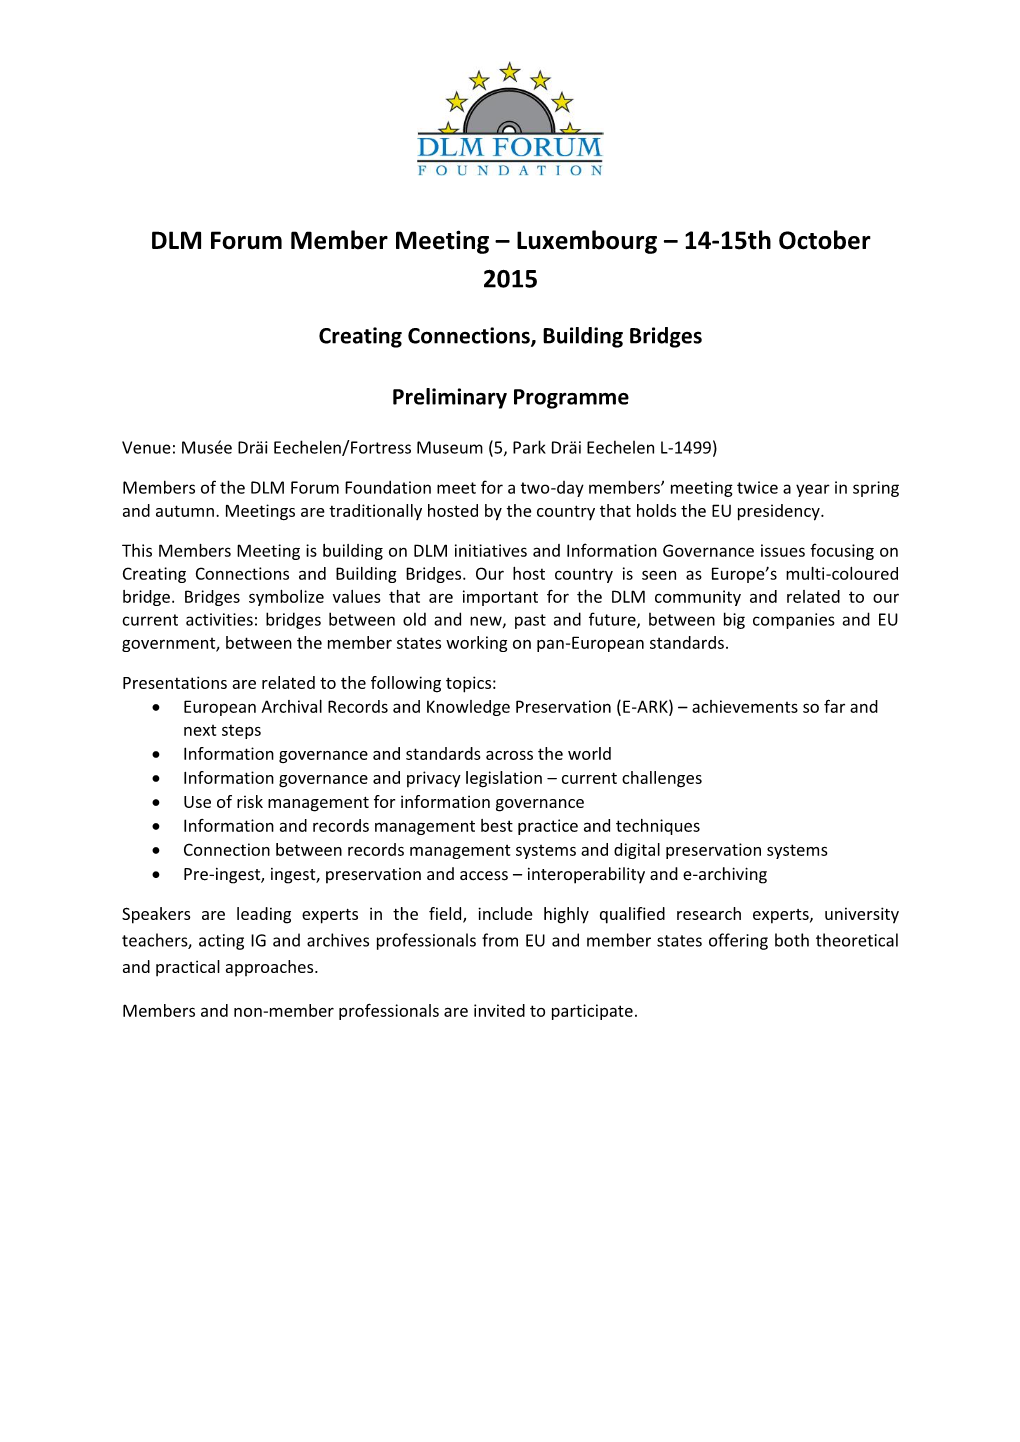 DLM Forum Member Meeting – Luxembourg – 14-15Th October 2015